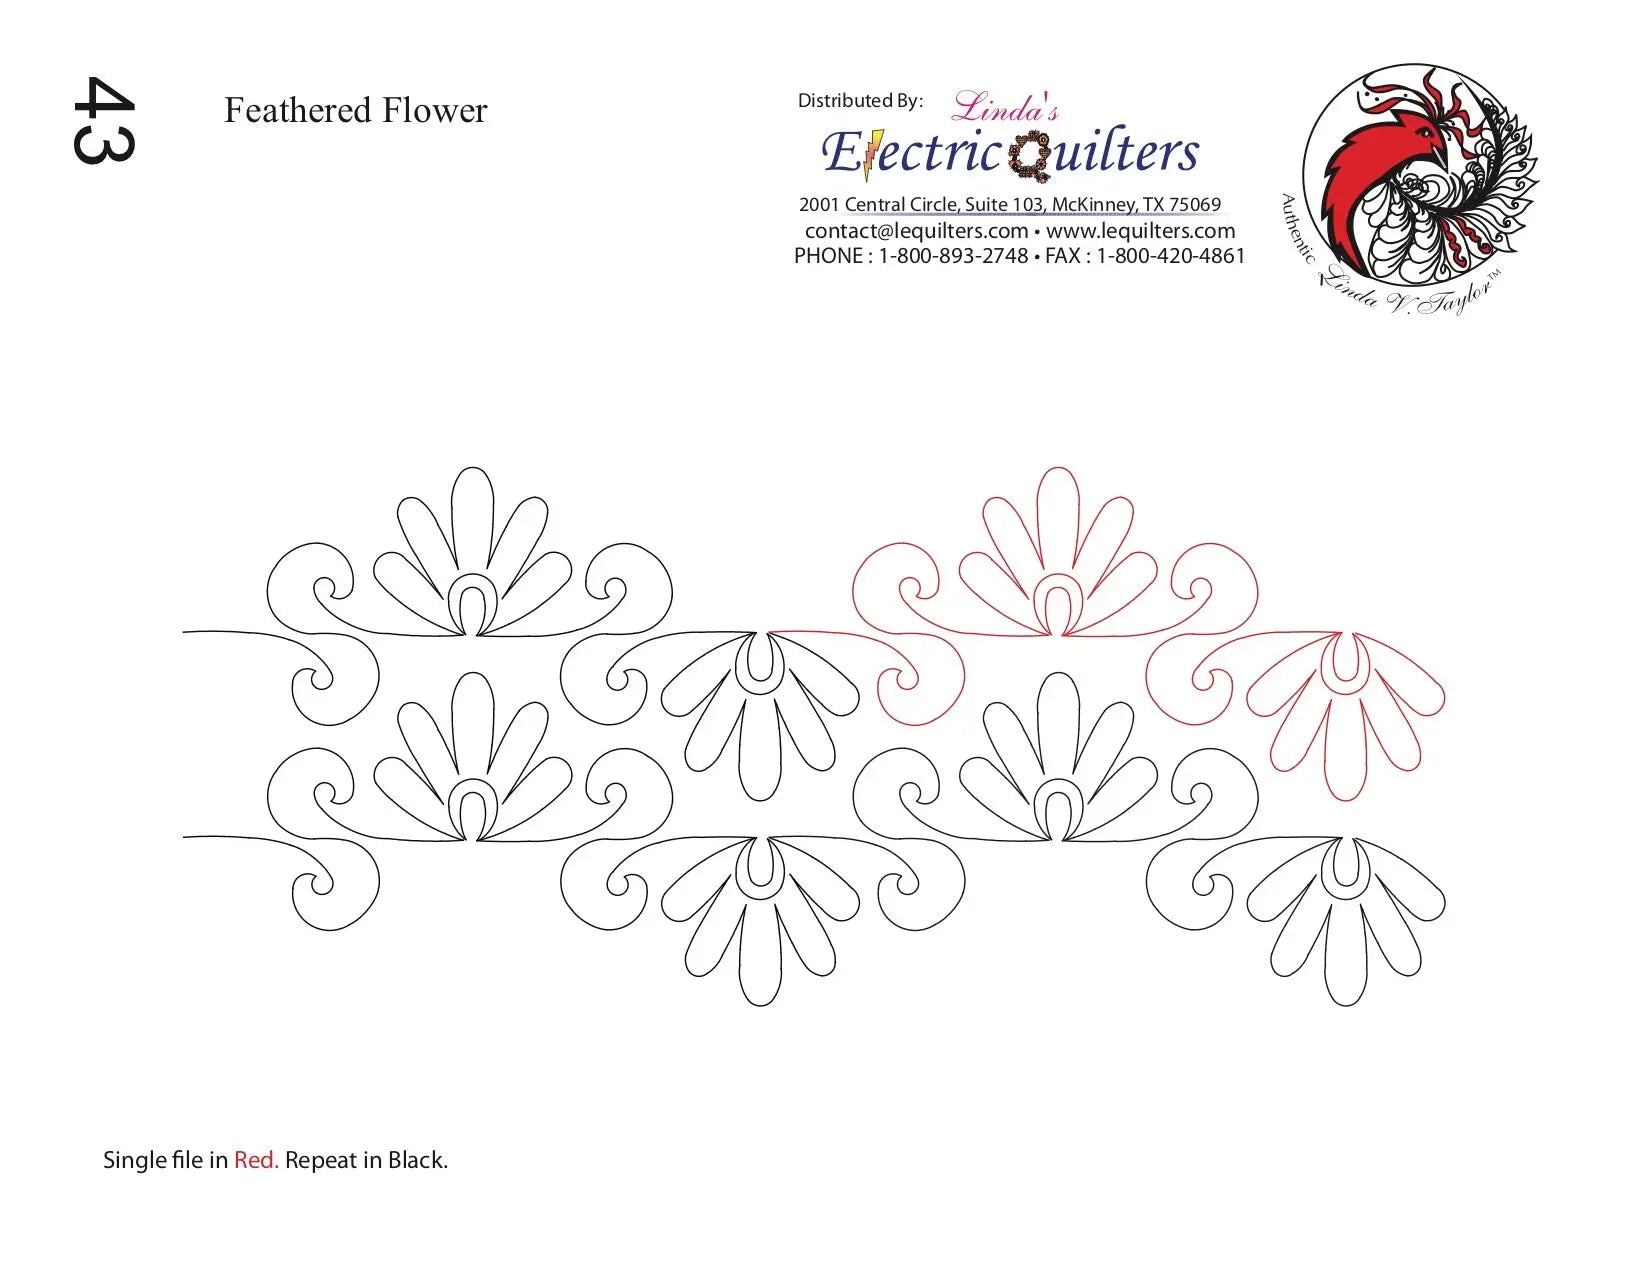 043 Feathered Flower Pantograph by Linda V. Taylor - Linda's Electric Quilters